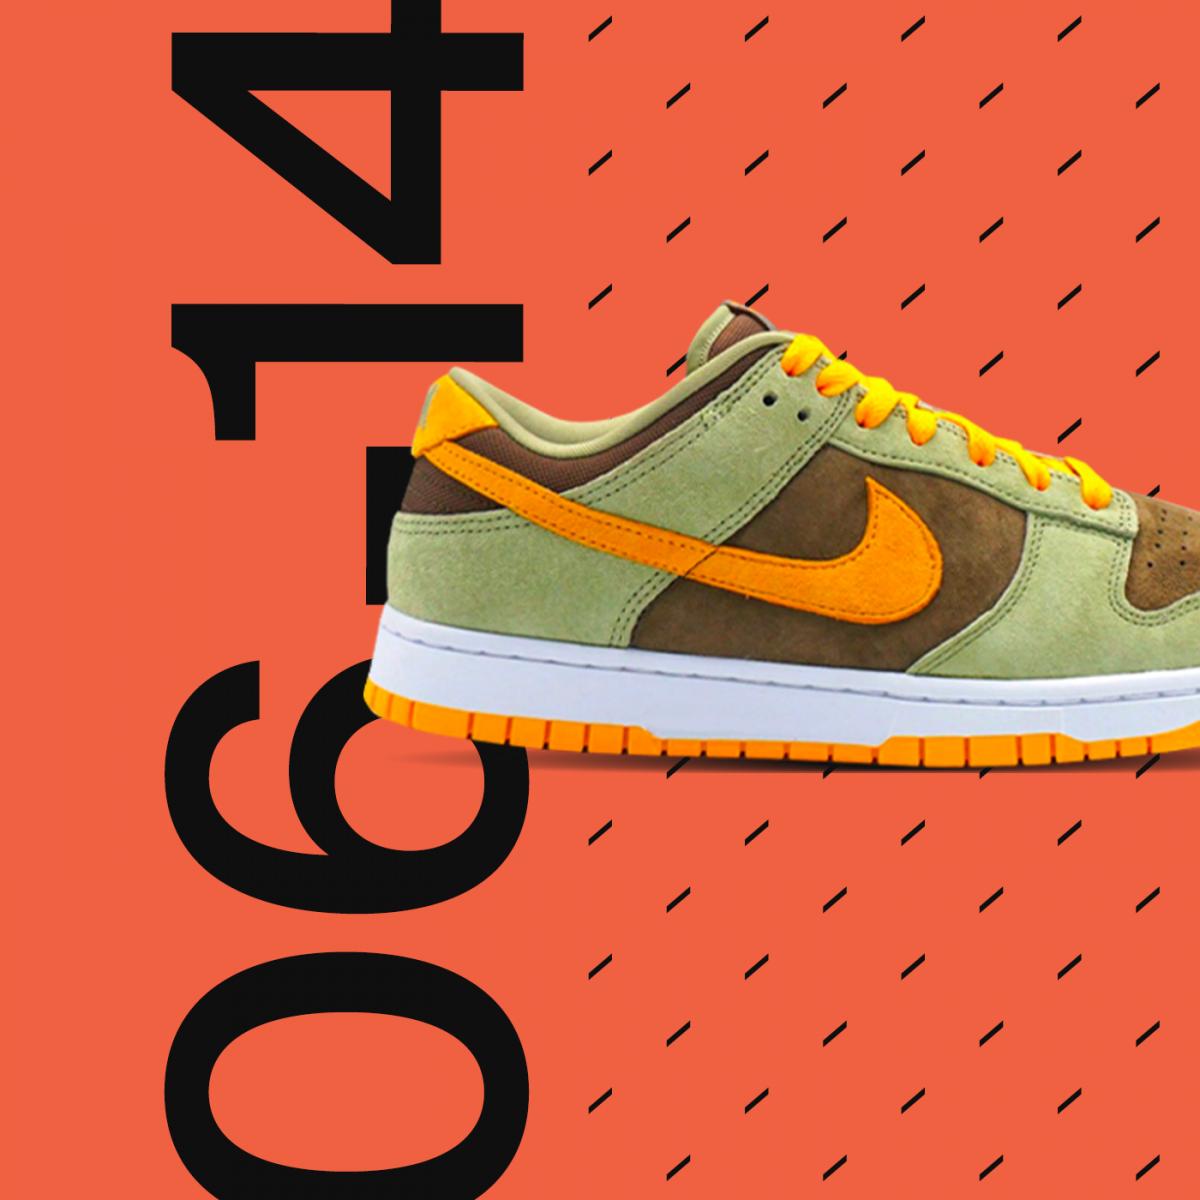 NIKE DUNK DUSTY OLIVE  MIGHT BE THE BEST COLORWAY! 